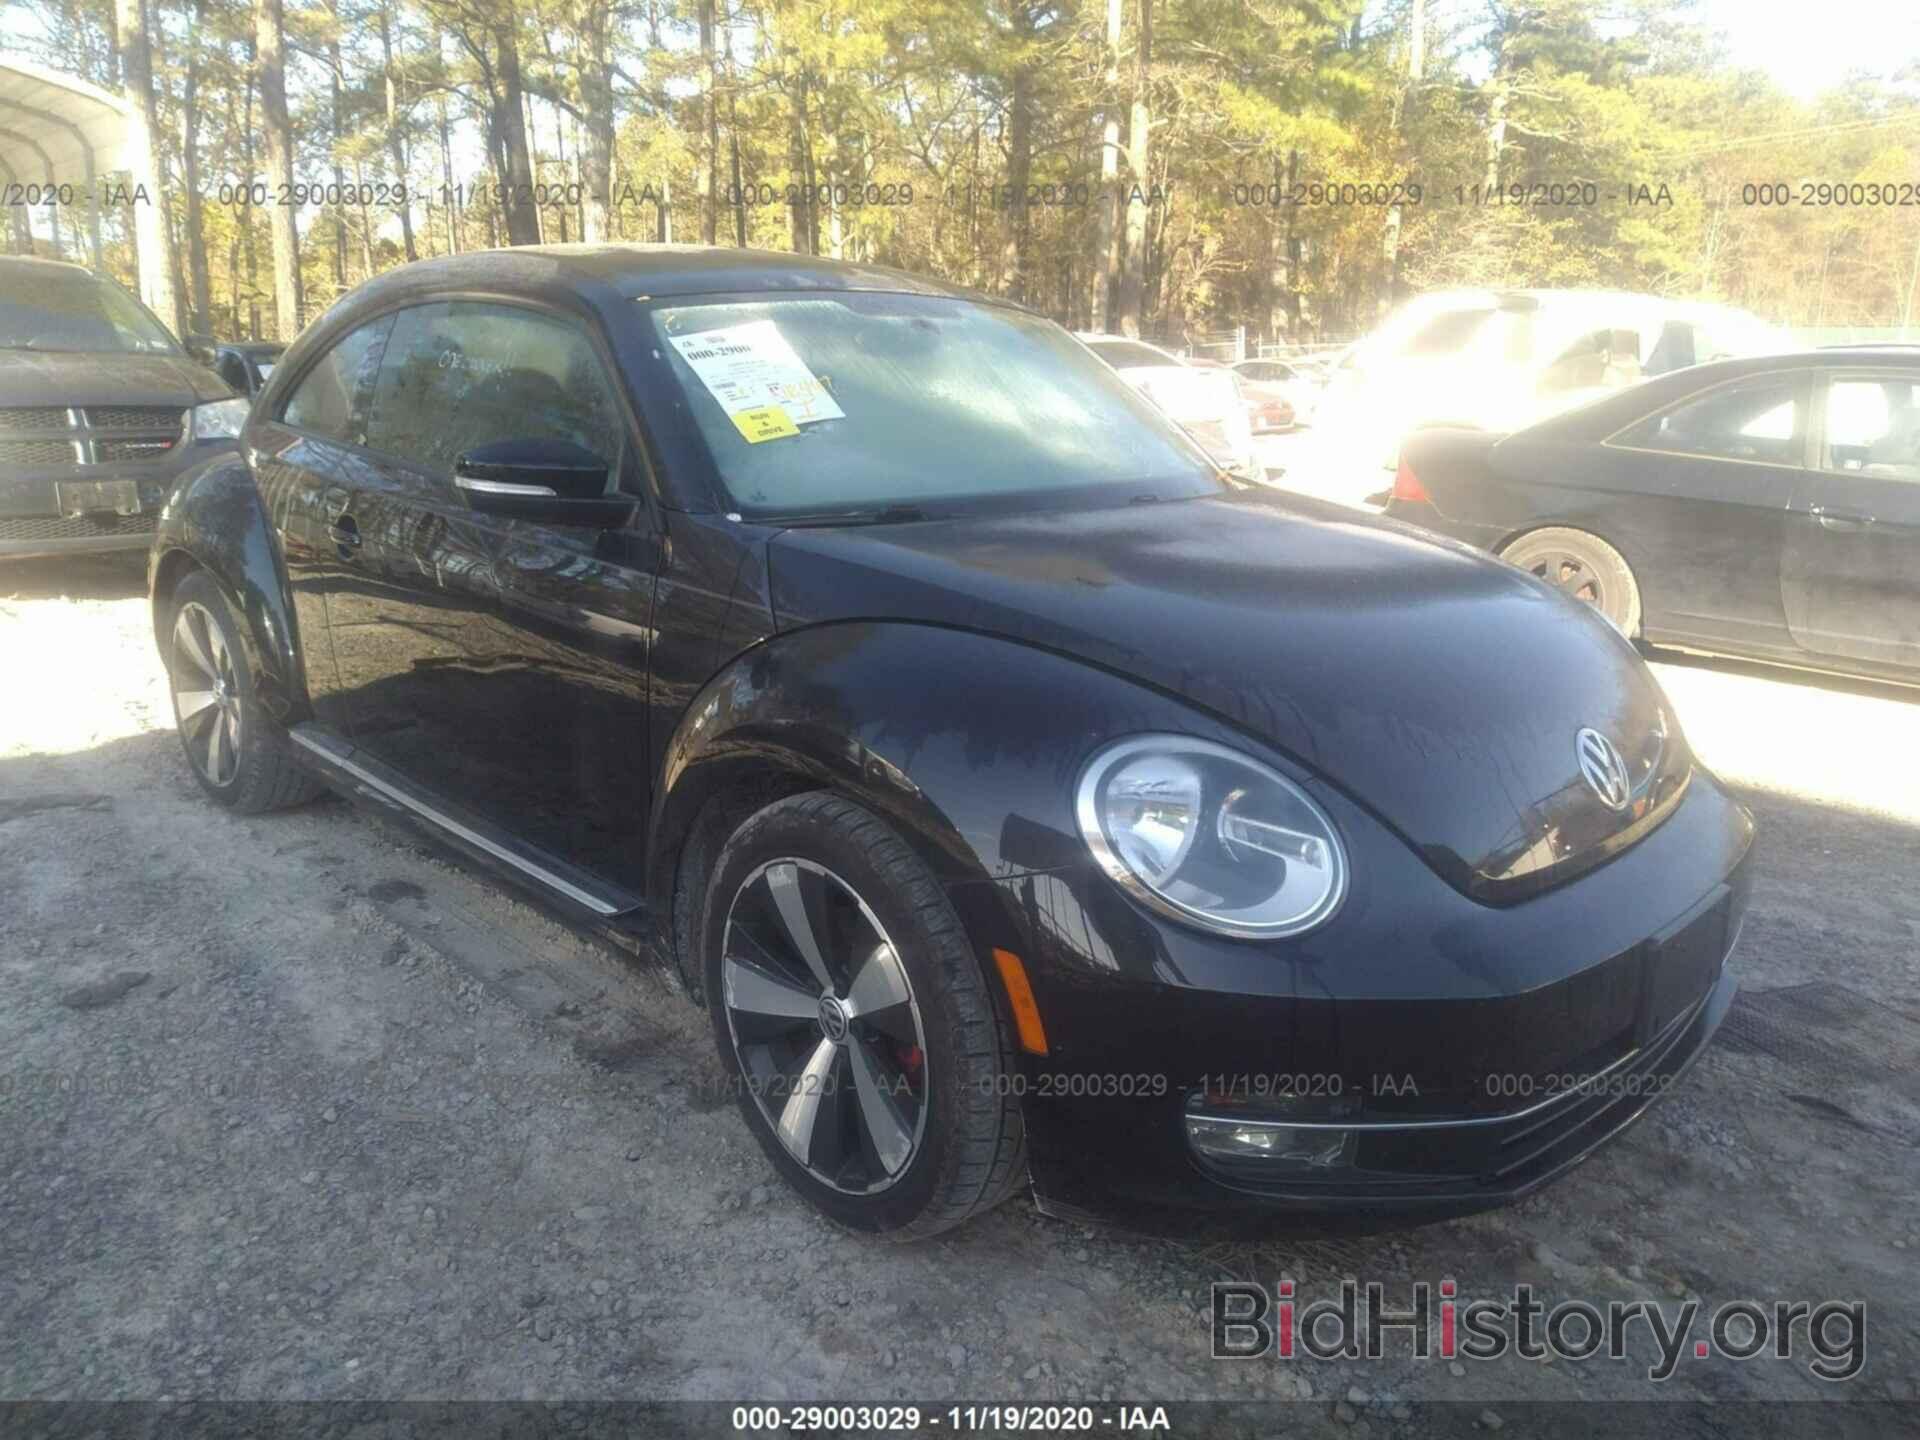 Photo 3VW4A7AT5CM634208 - VOLKSWAGEN BEETLE 2012